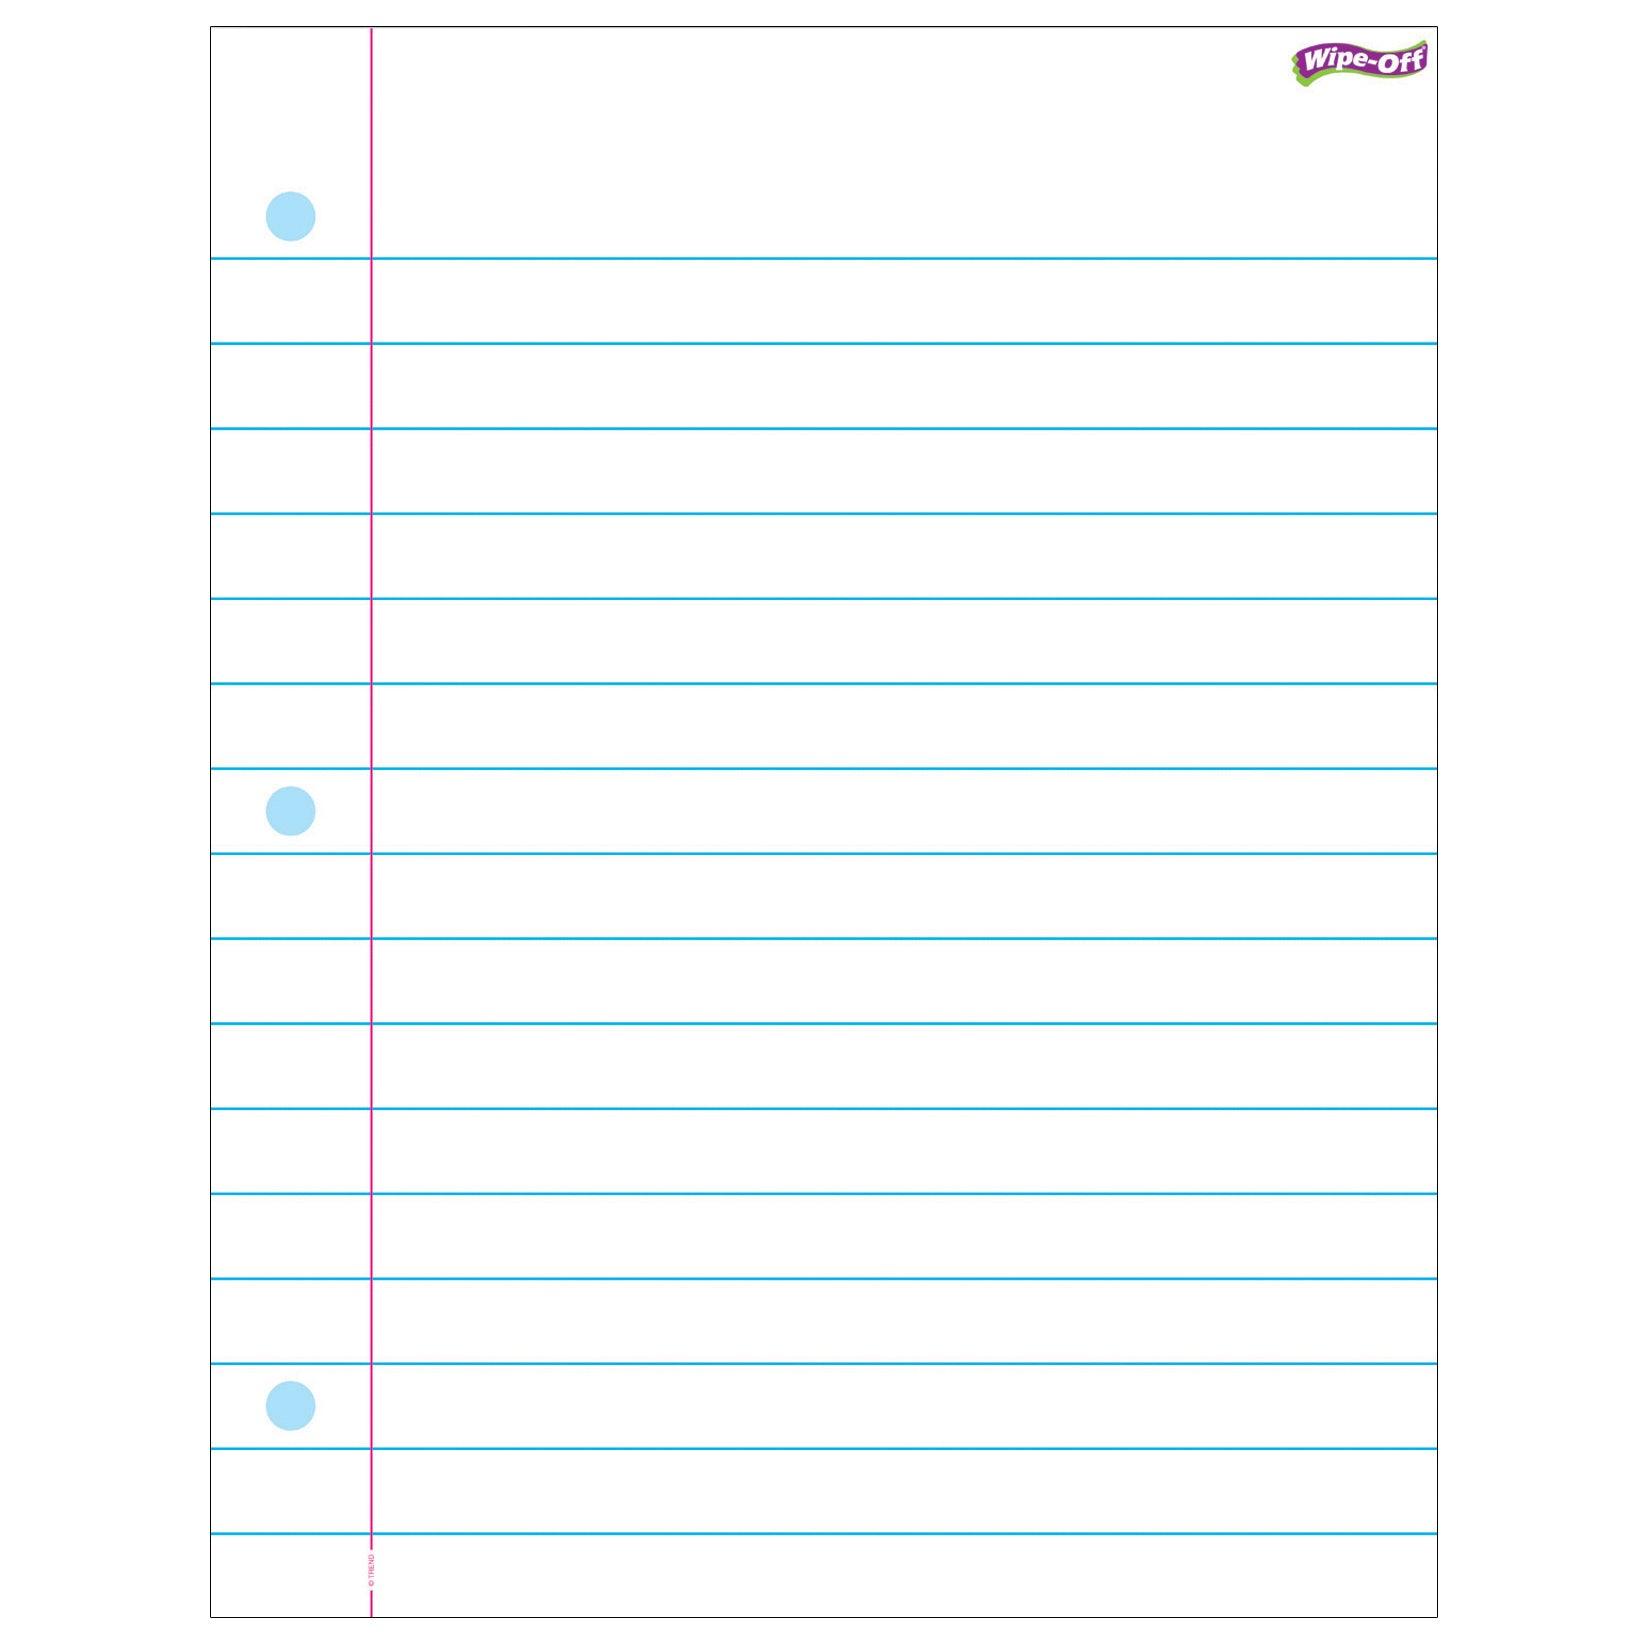 Notebook Paper Wipe-Off® Chart, 17" x 22", Pack of 6 - Loomini